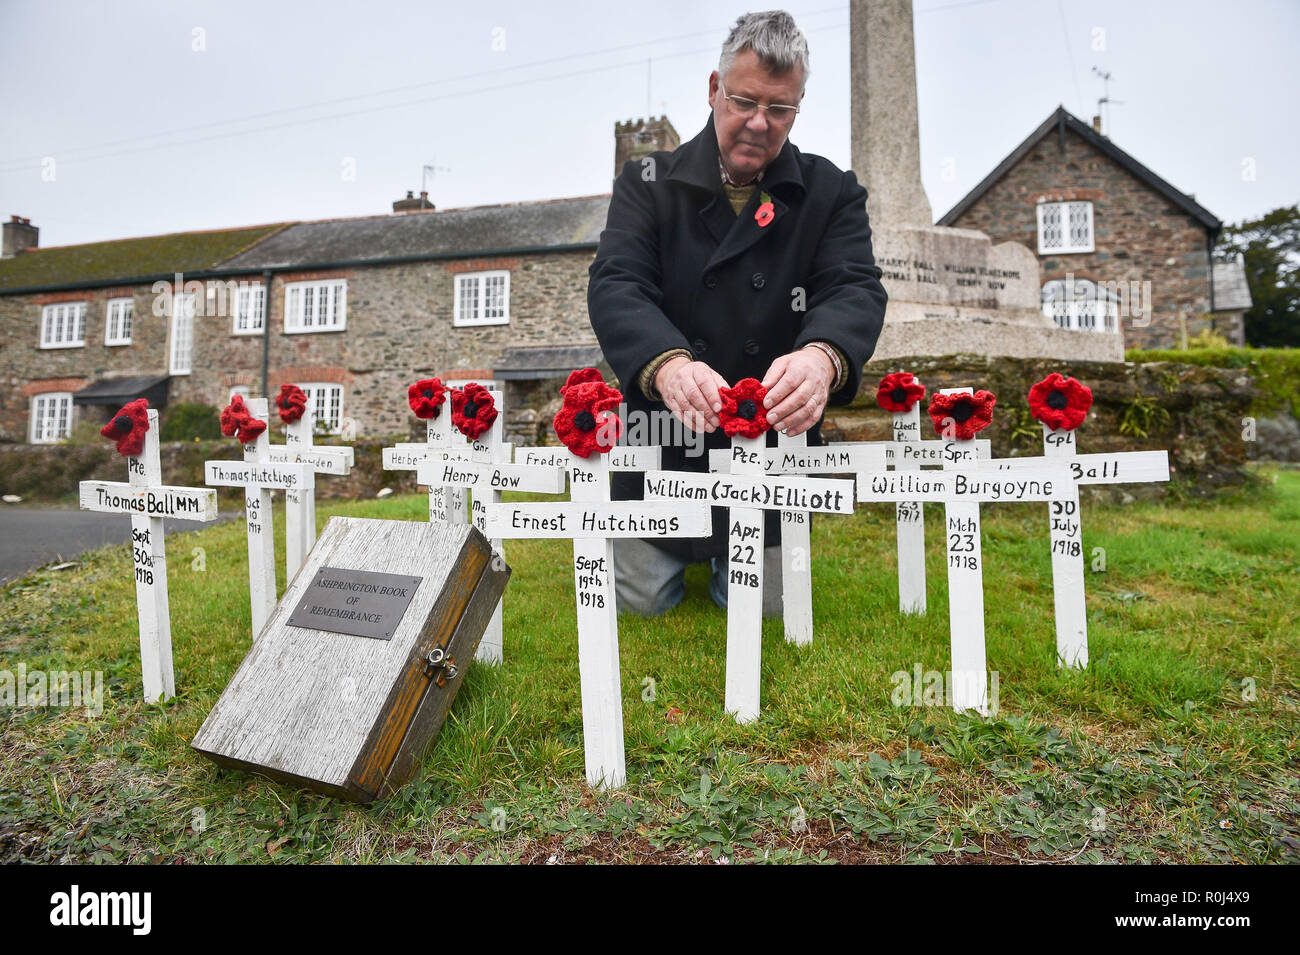 Local councillor Laurence Green tends to hand-made wooden crosses and hand-knitted poppies, which are placed on the war memorial in the Devonshire village of Ashprington, where he has adorned the small memorial with crosses of those that died in the Great War from the Ashprington Parish. Villagers tend the memorial and have made a book featuring details of parishioners that served and died during the First World War. Stock Photo